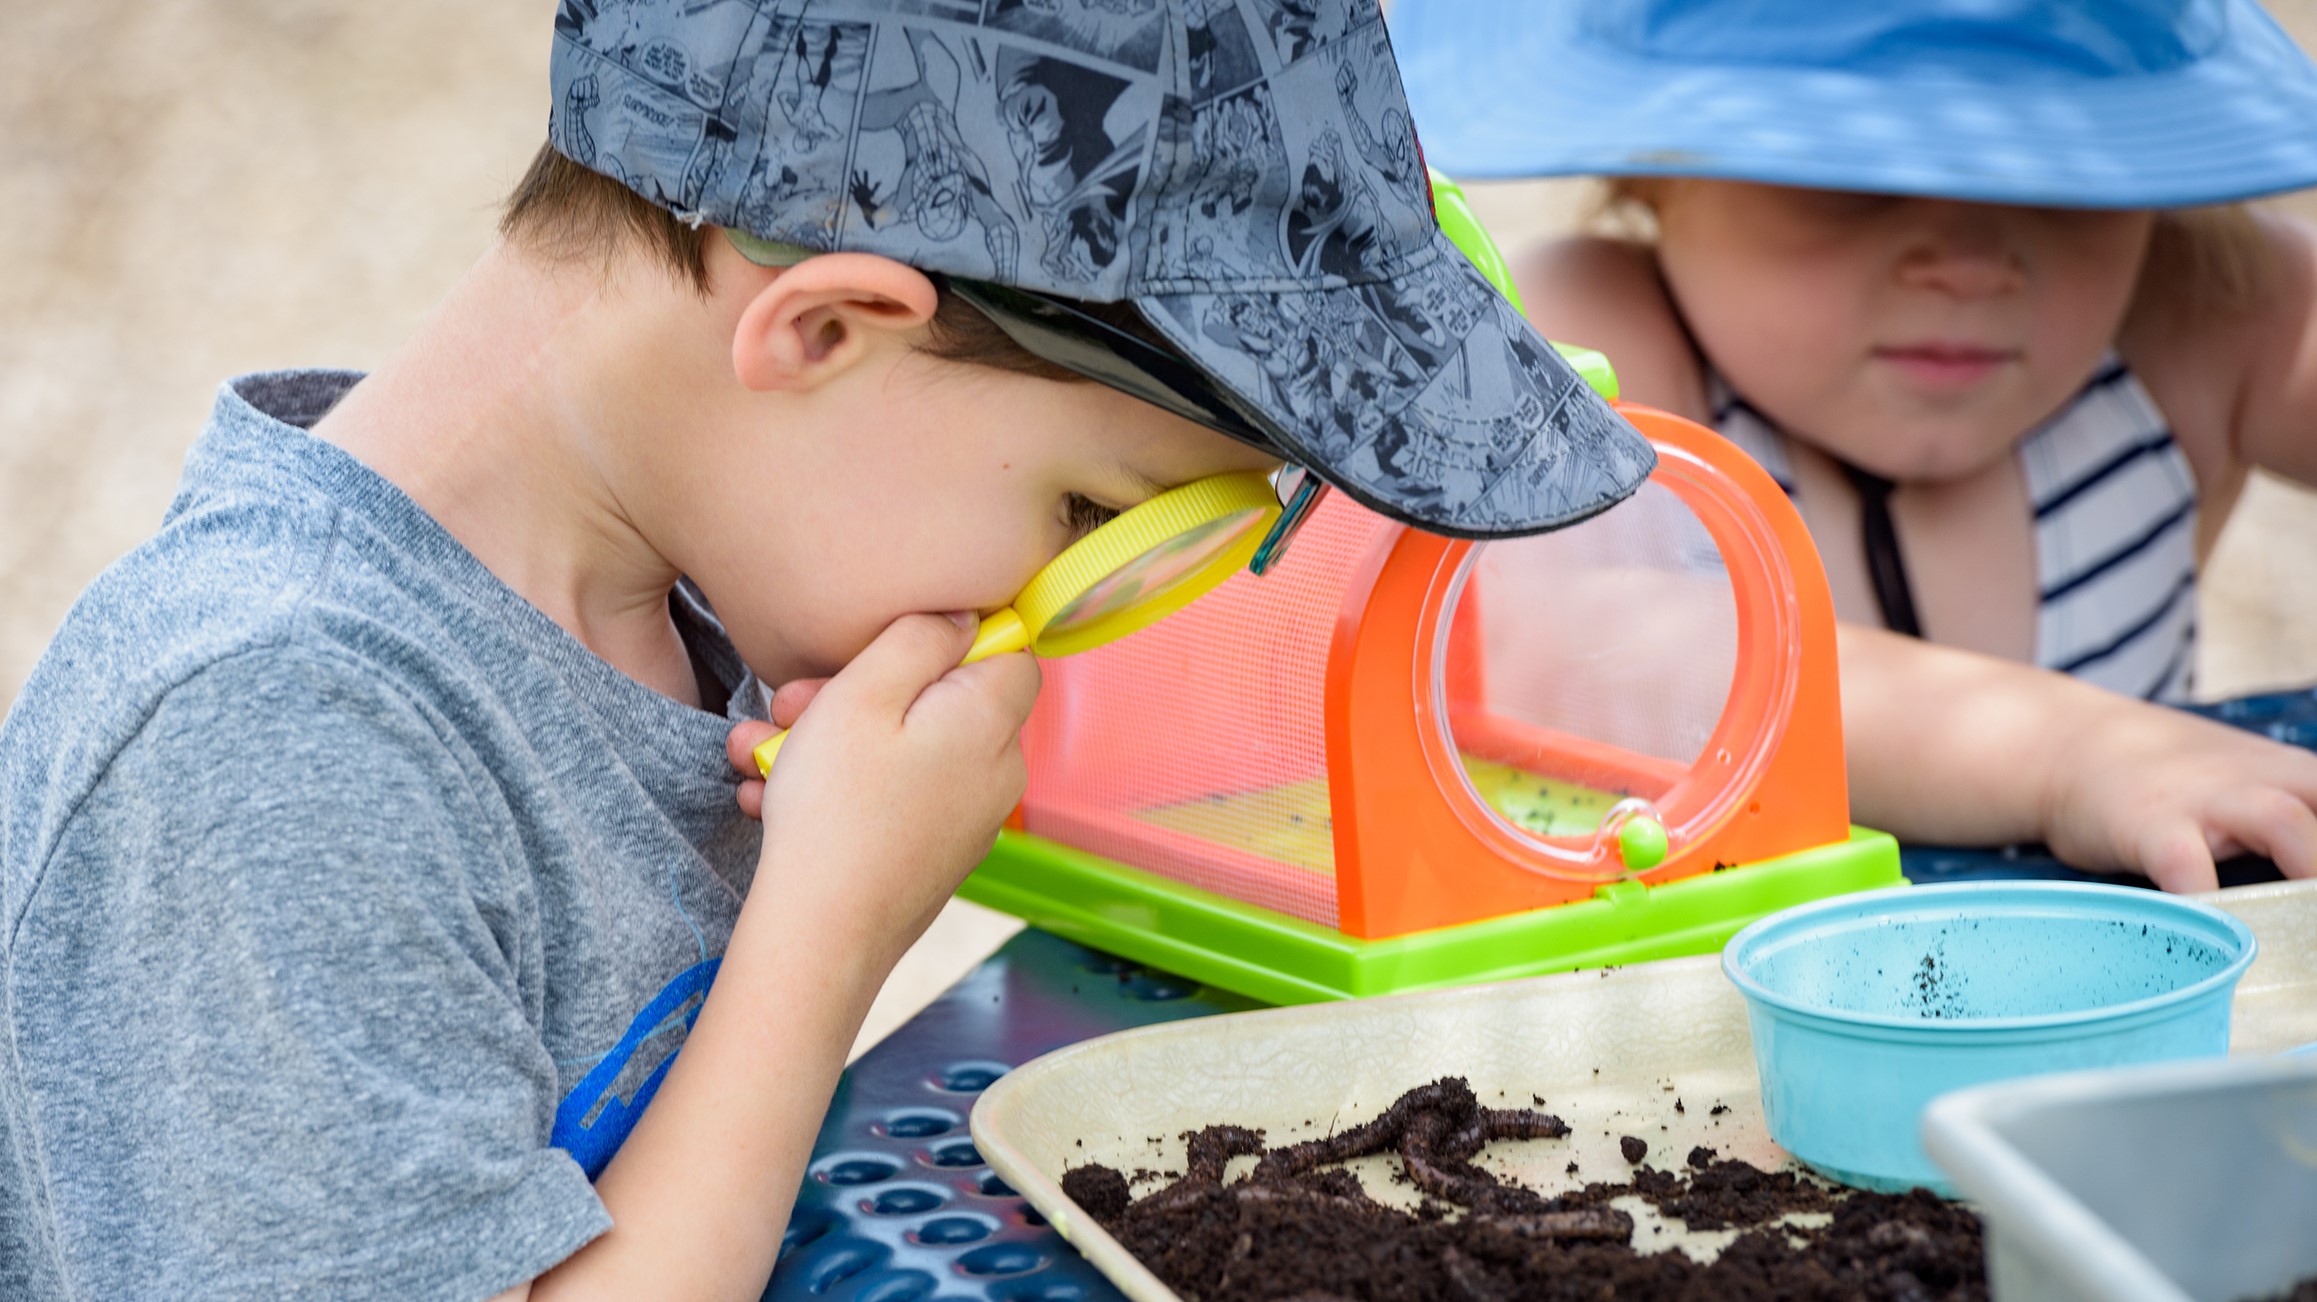 A boy studies earth worms with a magnifying glass during a nature-based activity.